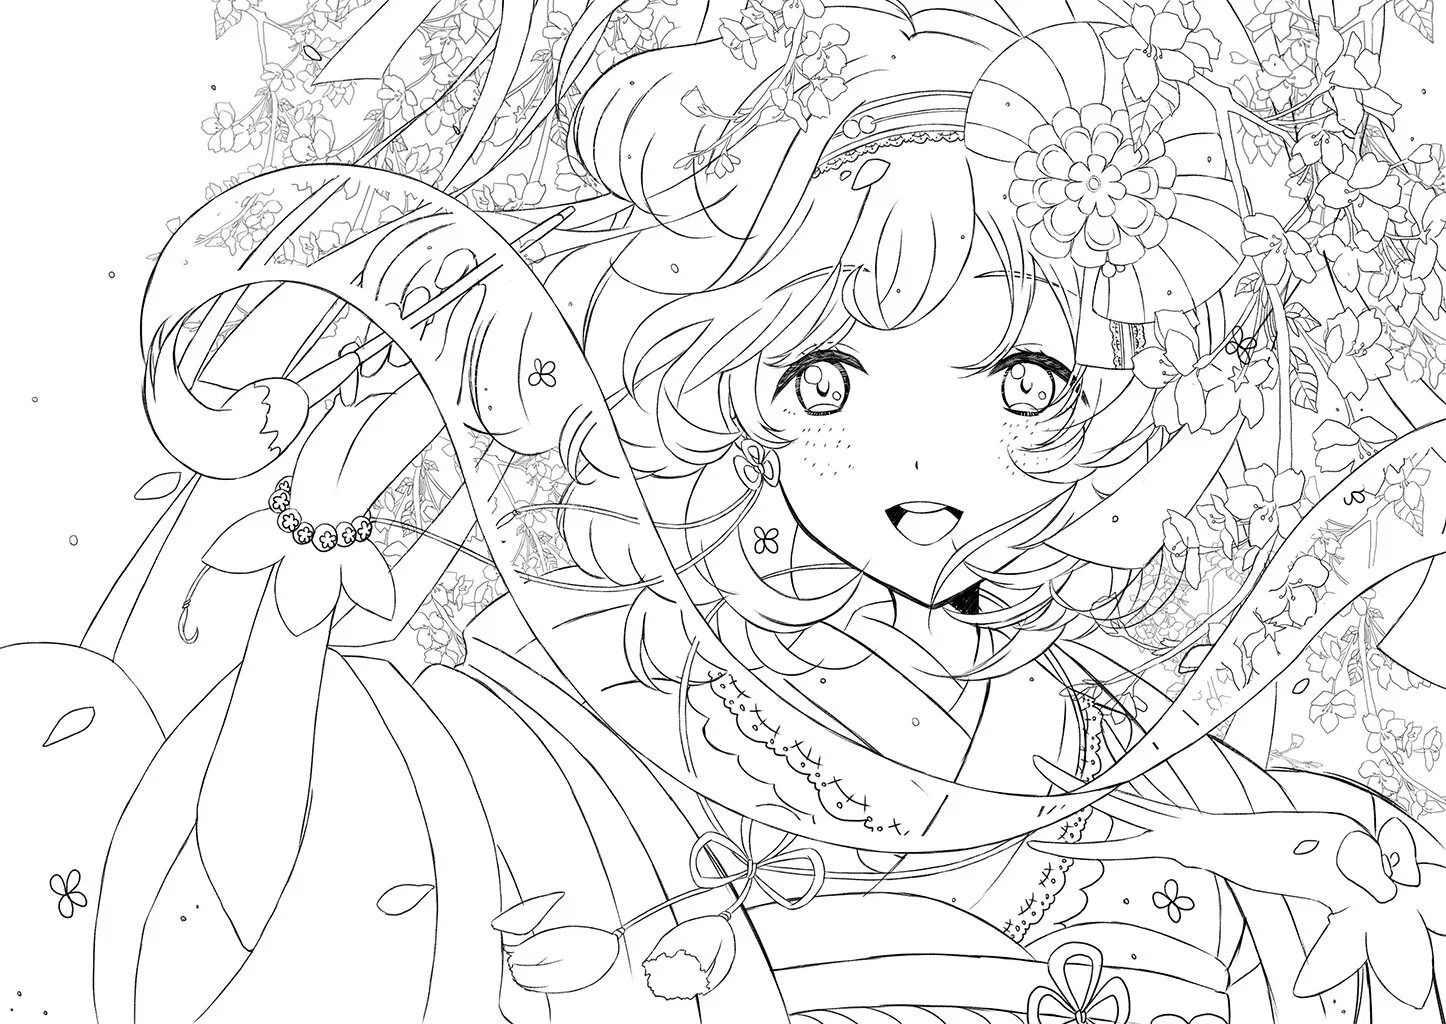 Intriguing spiral anime coloring book